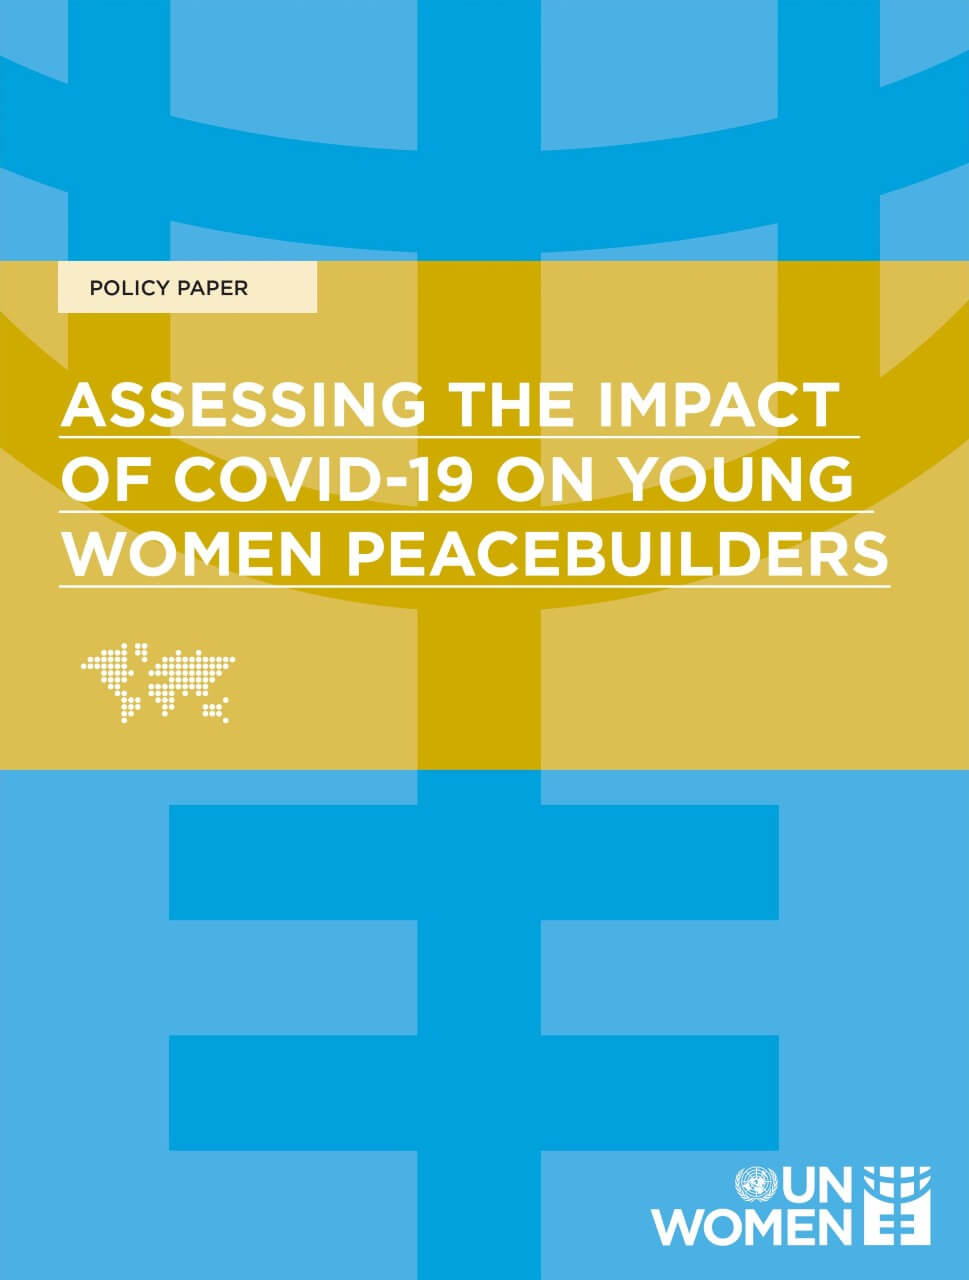 Policy paper: Assessing the impact of COVID-19 on young women peacebuilders